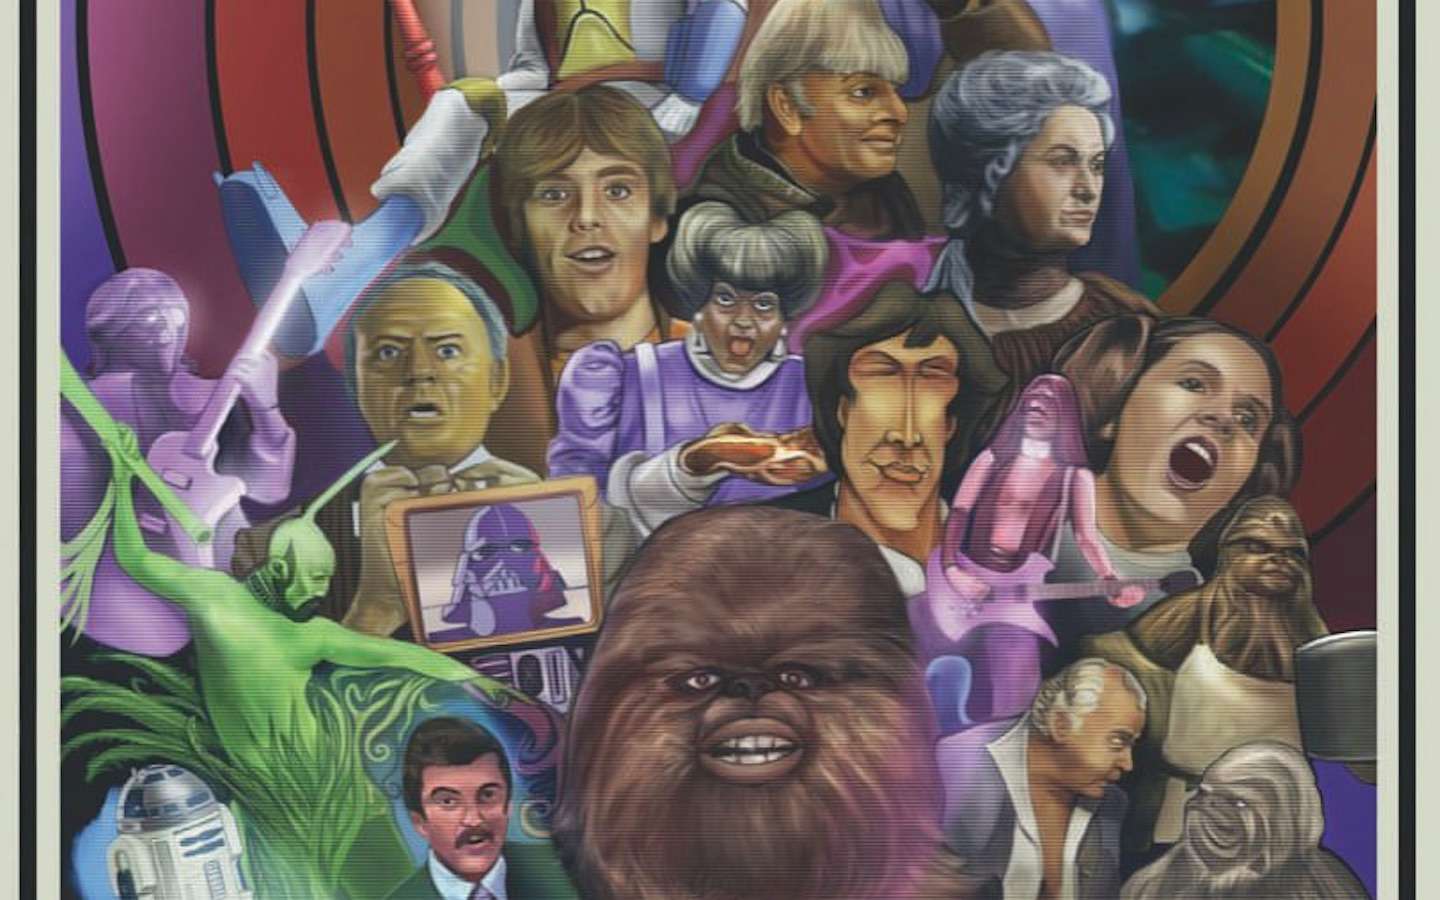 Star Wars Holiday Special documentary